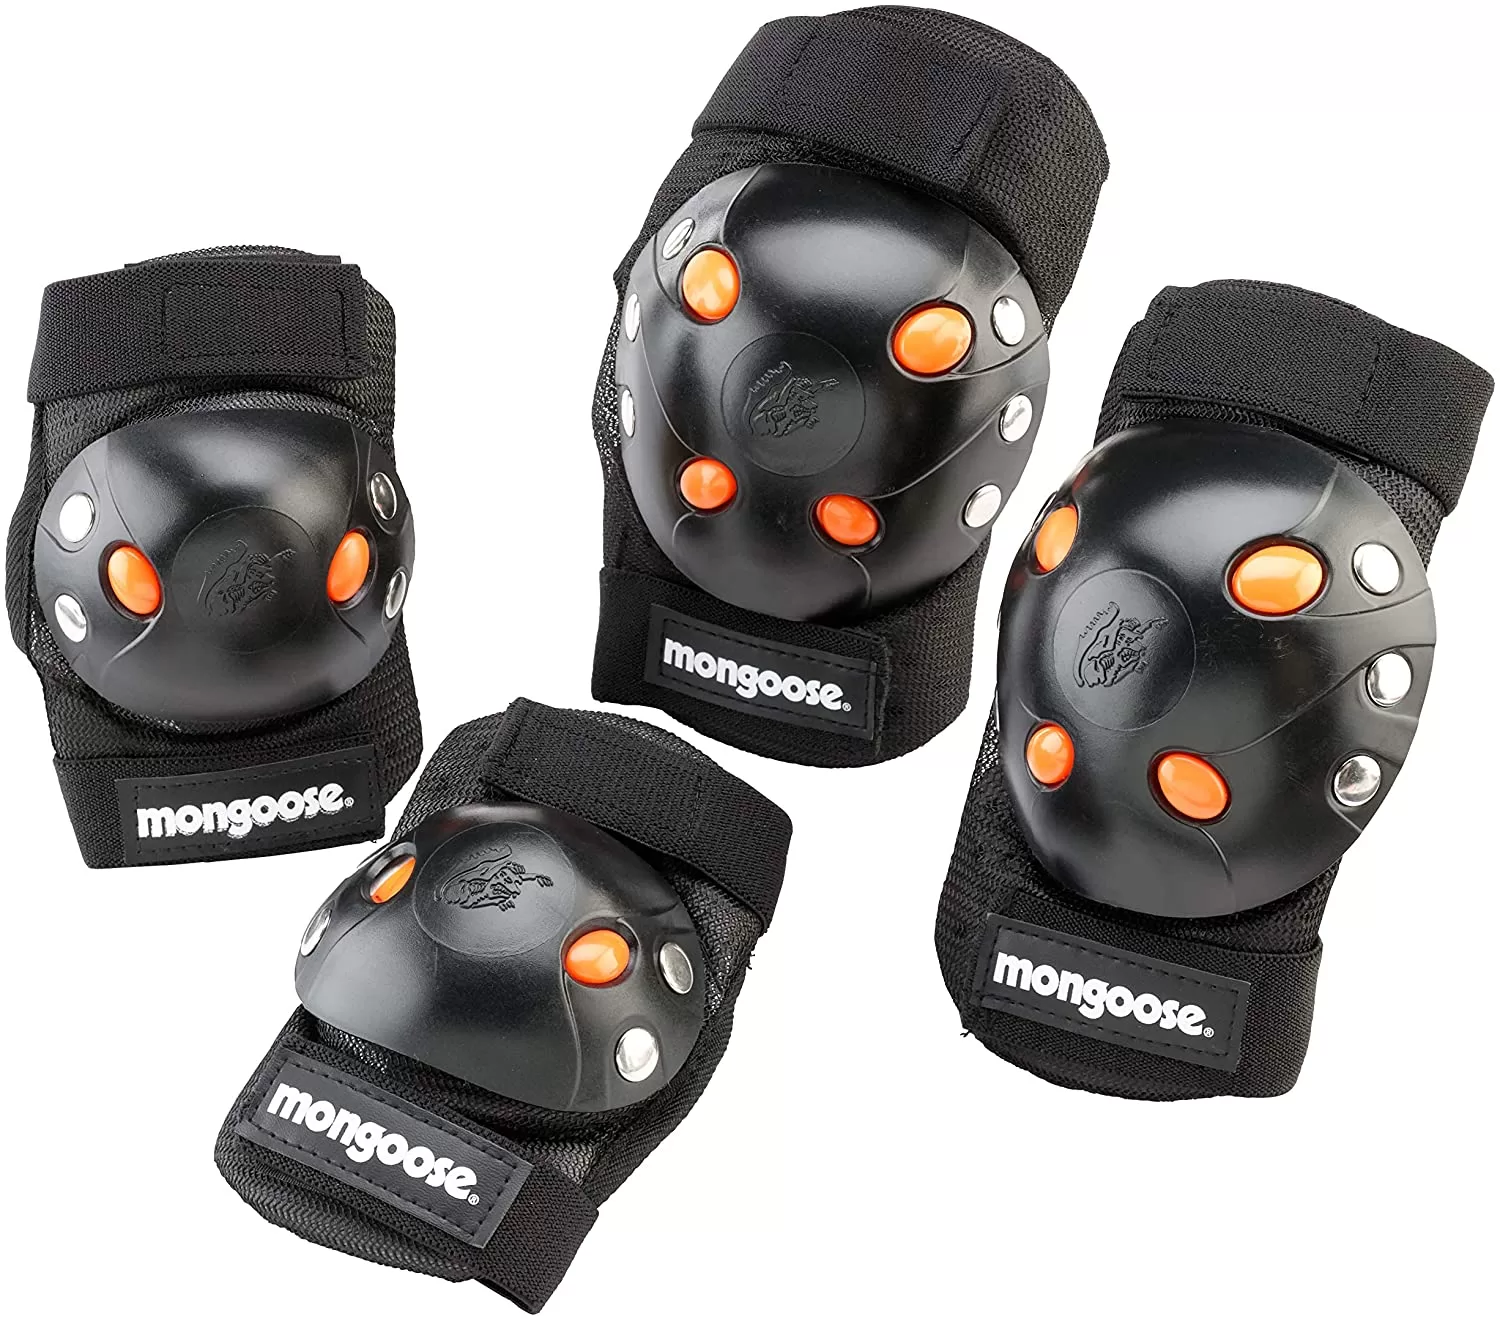 Mongoose Youth Knee and Elbow Pad Set